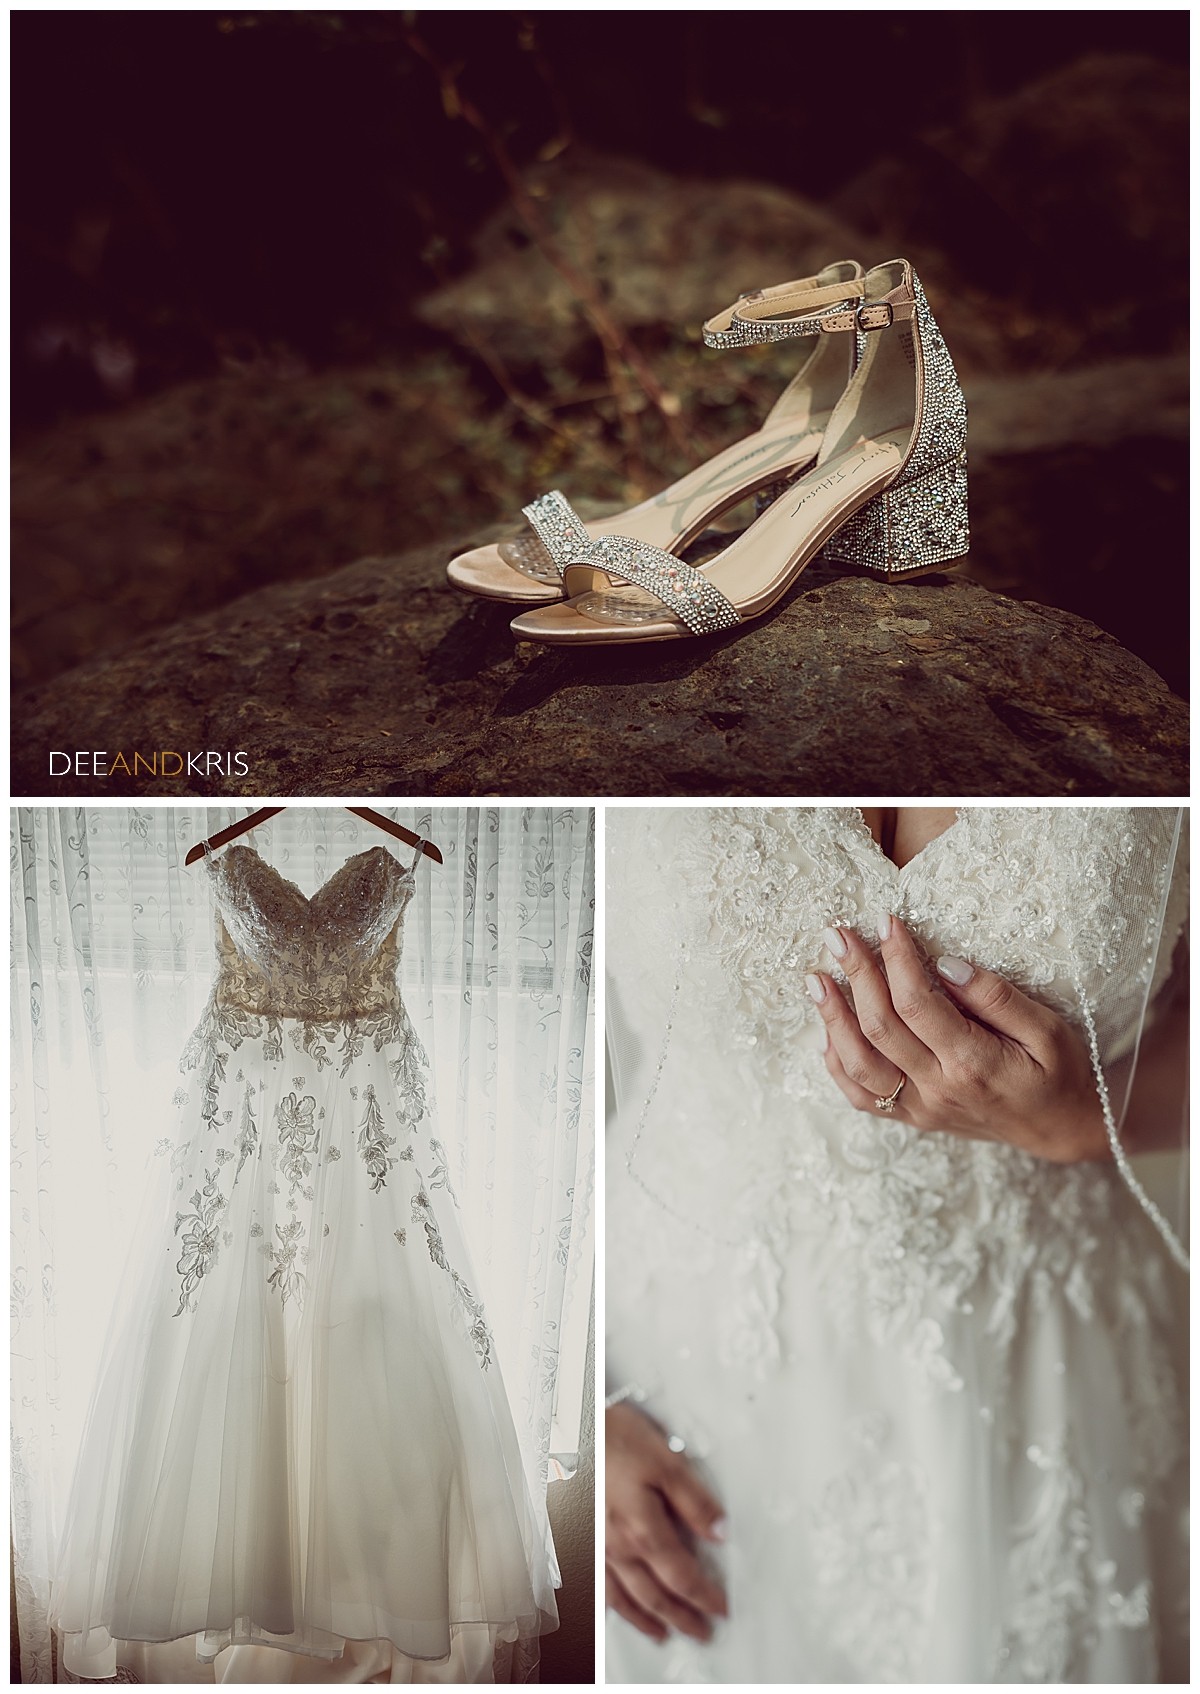 Three images of wedding shoes and gown.